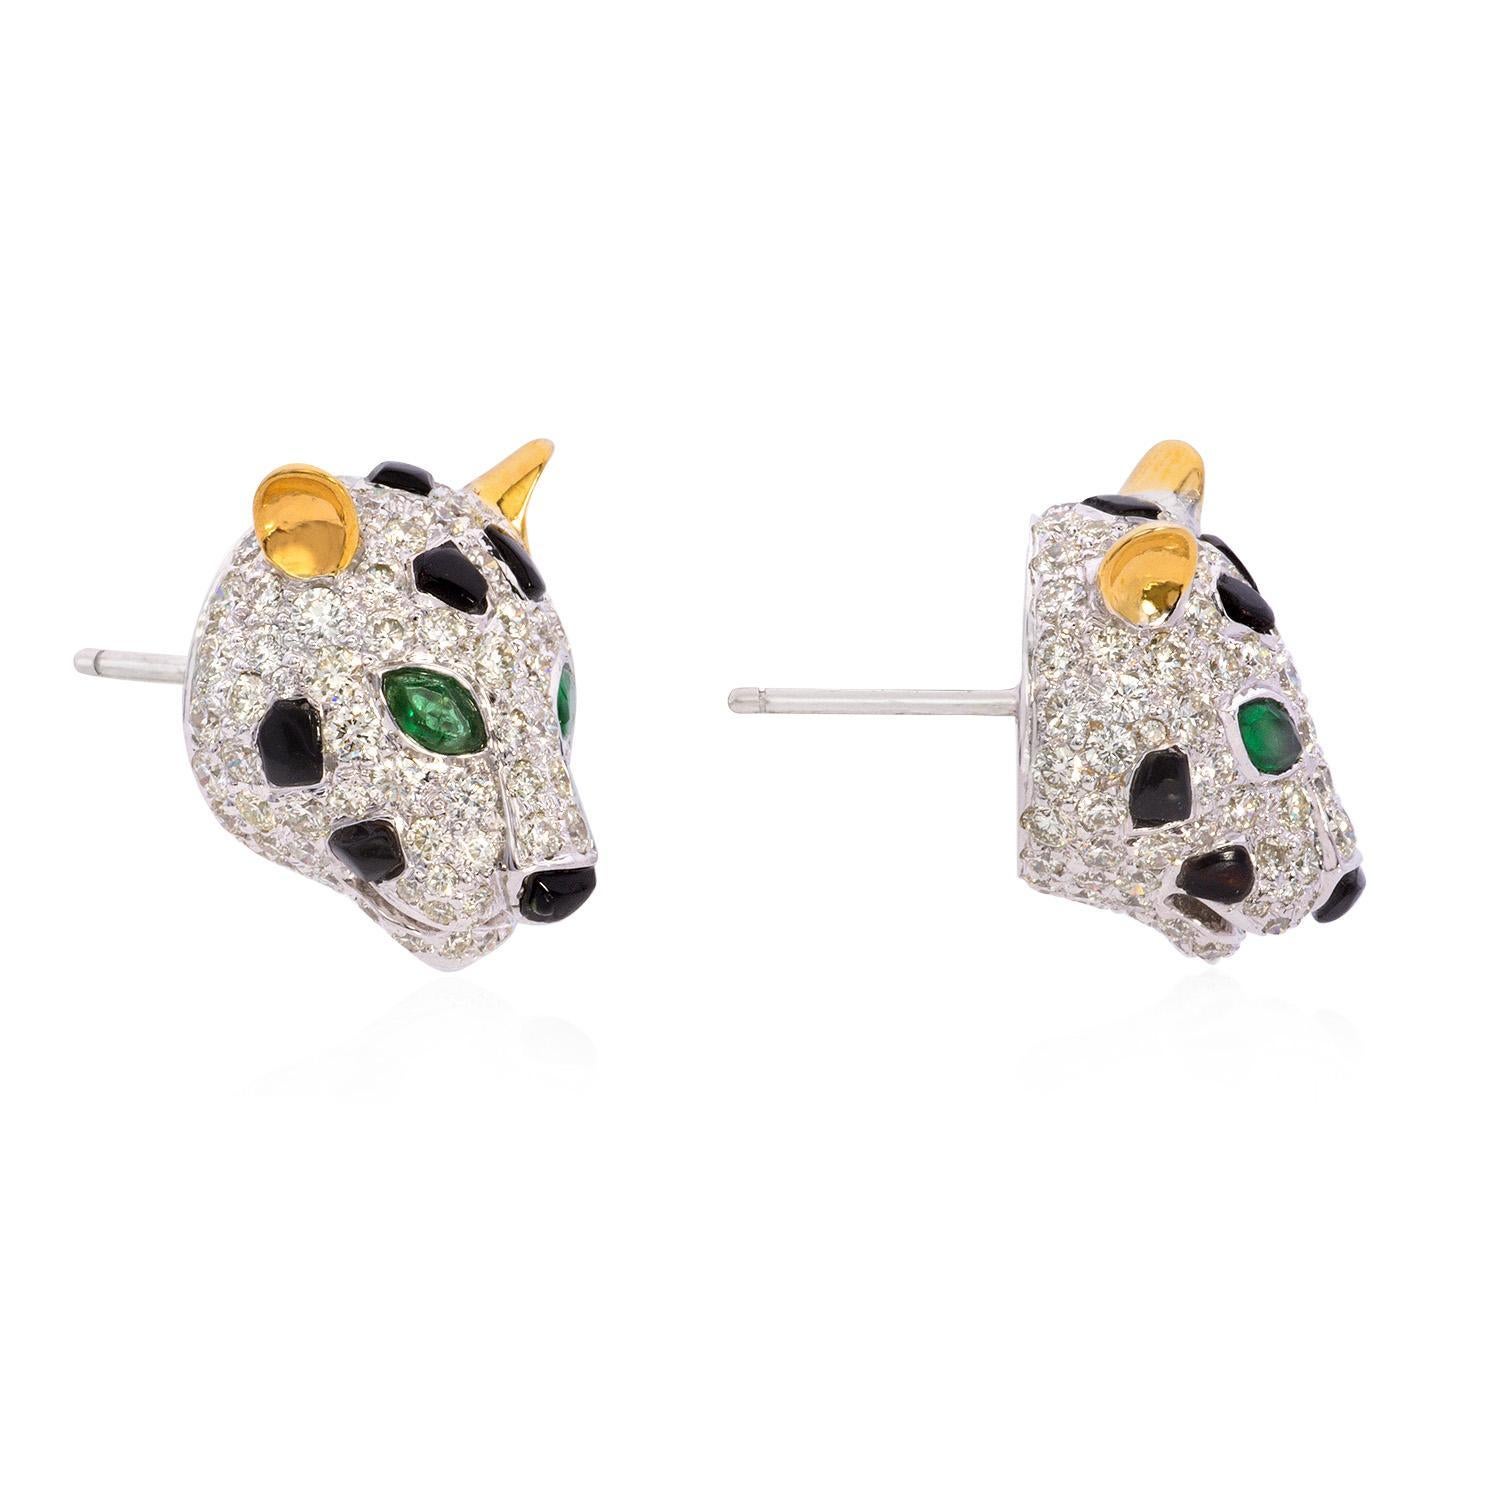 Introducing our Panther Studs—a bold and captivating expression of feline grace and dazzling elegance. These exquisite earrings feature a striking 3.01 carats of diamonds, meticulously set in a sleek and modern 14K gold design weighing 10.35